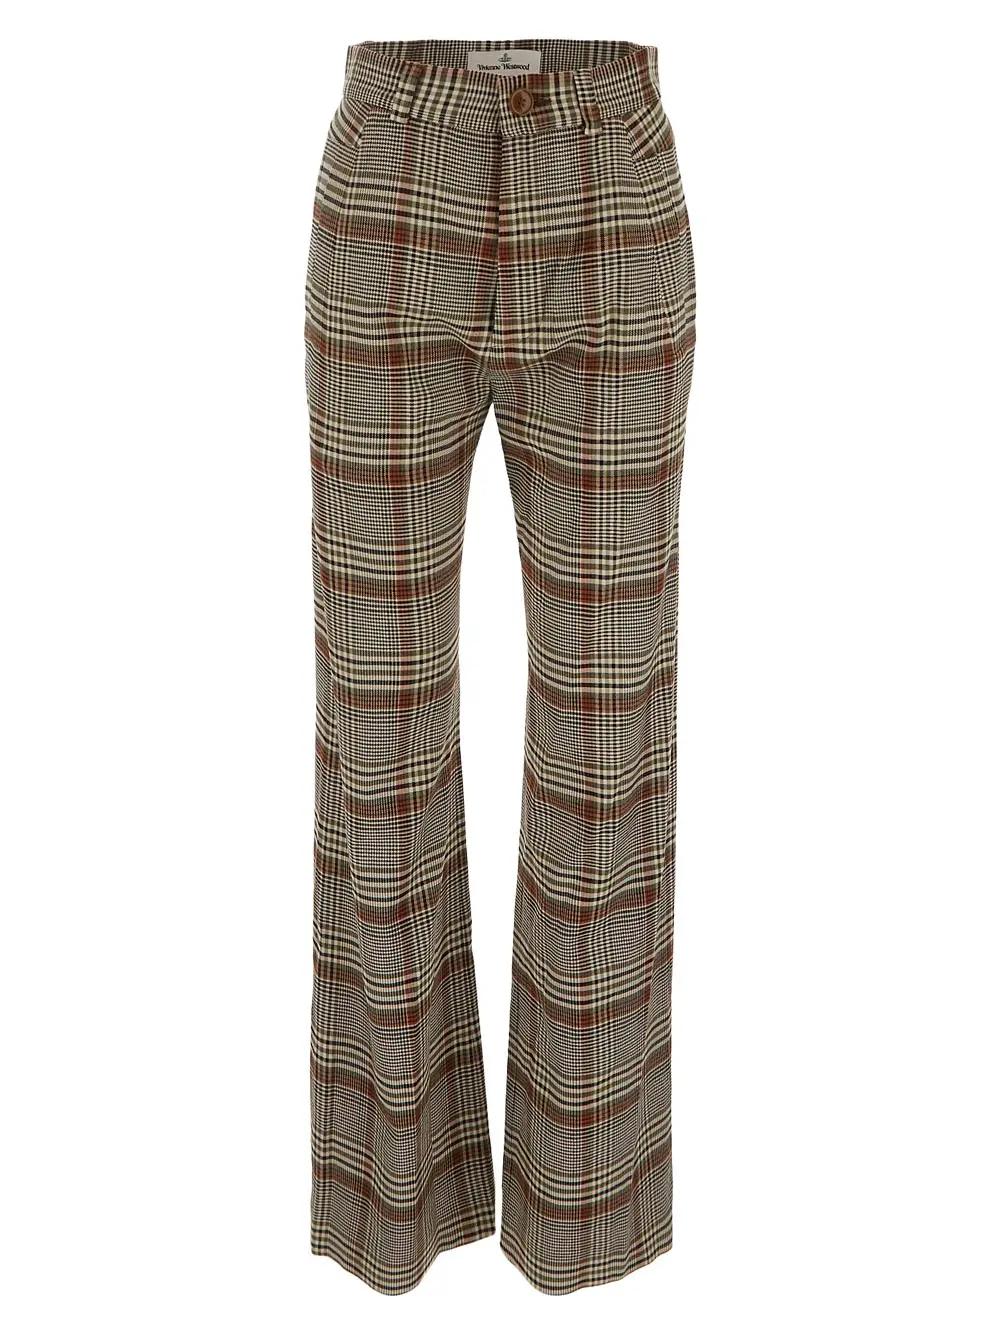 VIVIENNE WESTWOOD RAY TROUSERS